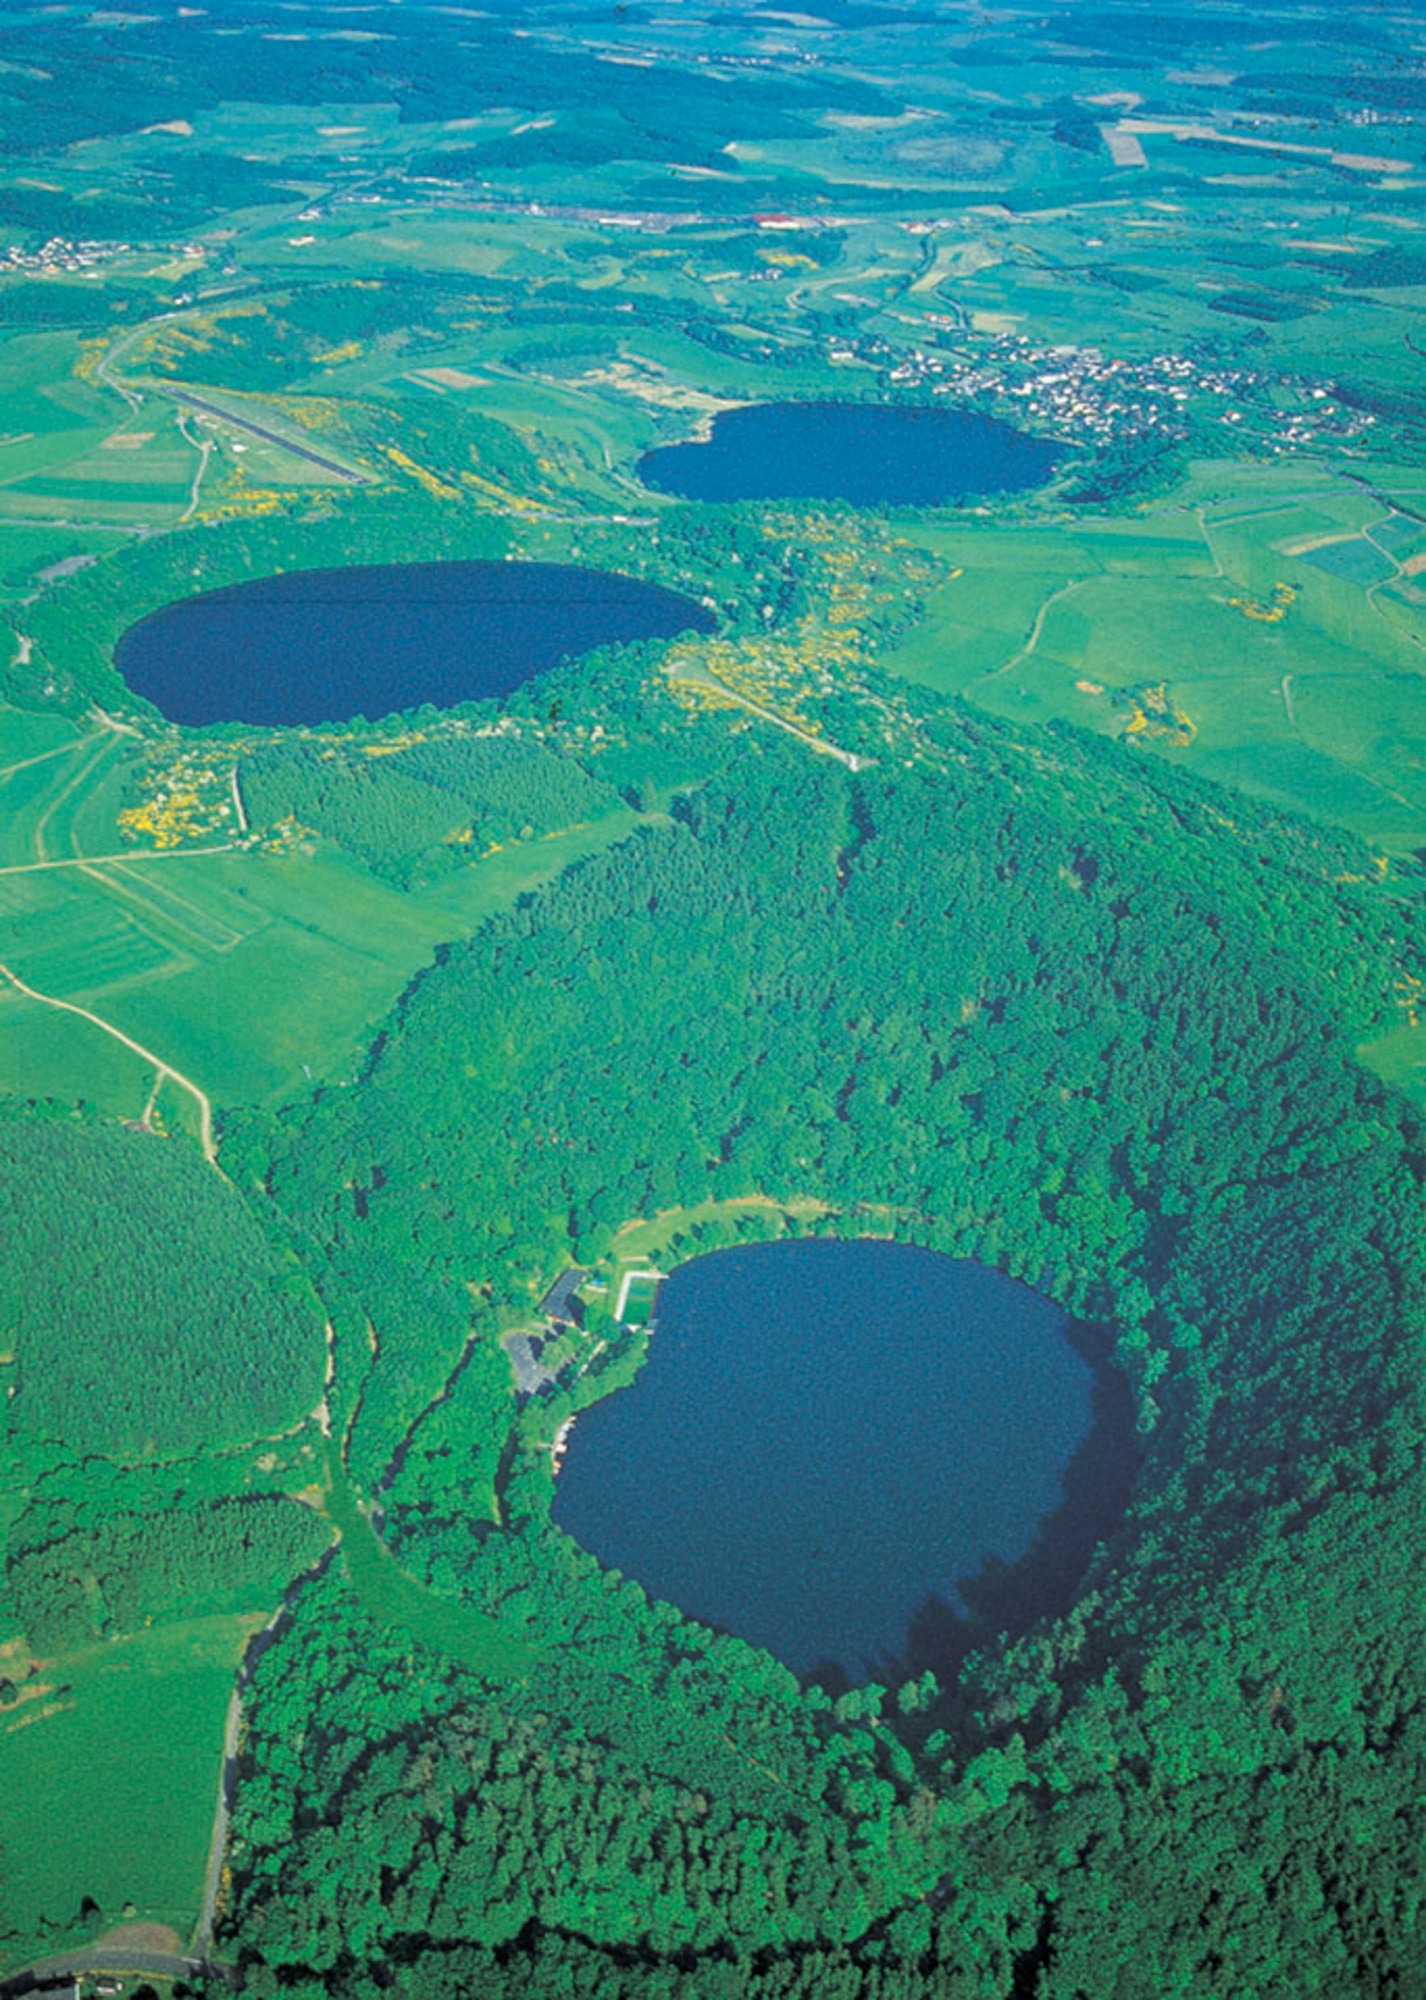 The volcanoes of the Eifel have been extinct for a long time. The Maare lakes, formed in these dormant volcanic craters, are a reminder of those days.

Today the lakes are very popular, annually attracting many tourists. Each lake is different, but they all have one thing in common - all are steeped in age-old legend. (Courtesy photo)